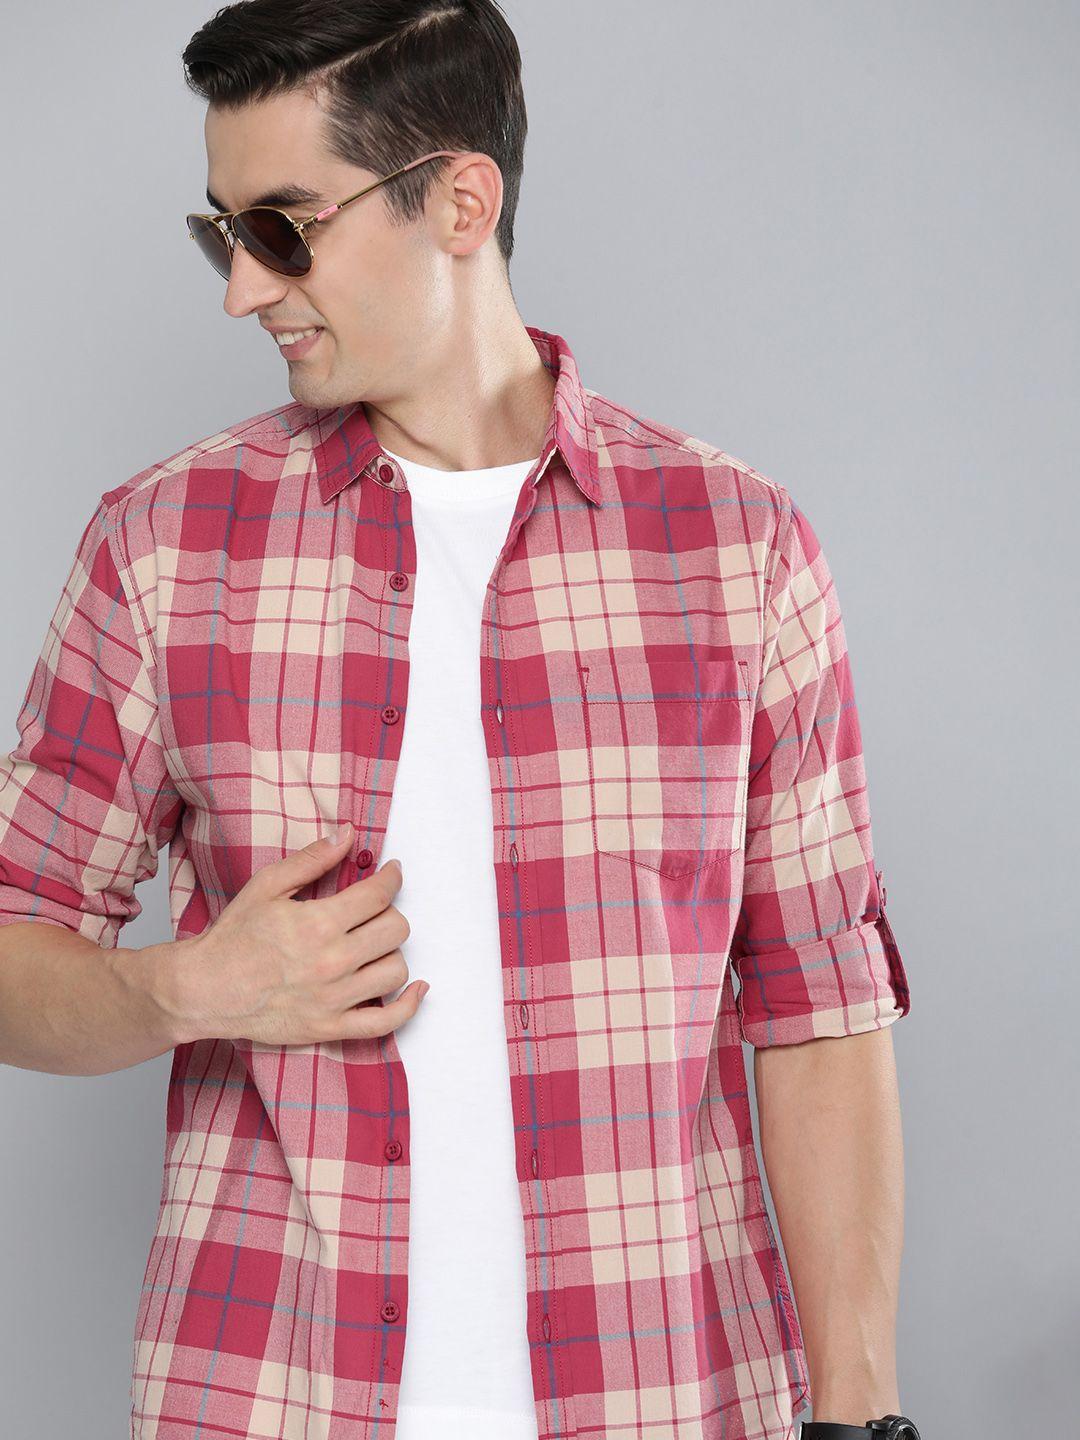 here&now-men-maroon-&-beige-slim-fit-checked-sustainable-casual-pure-cotton-shirt